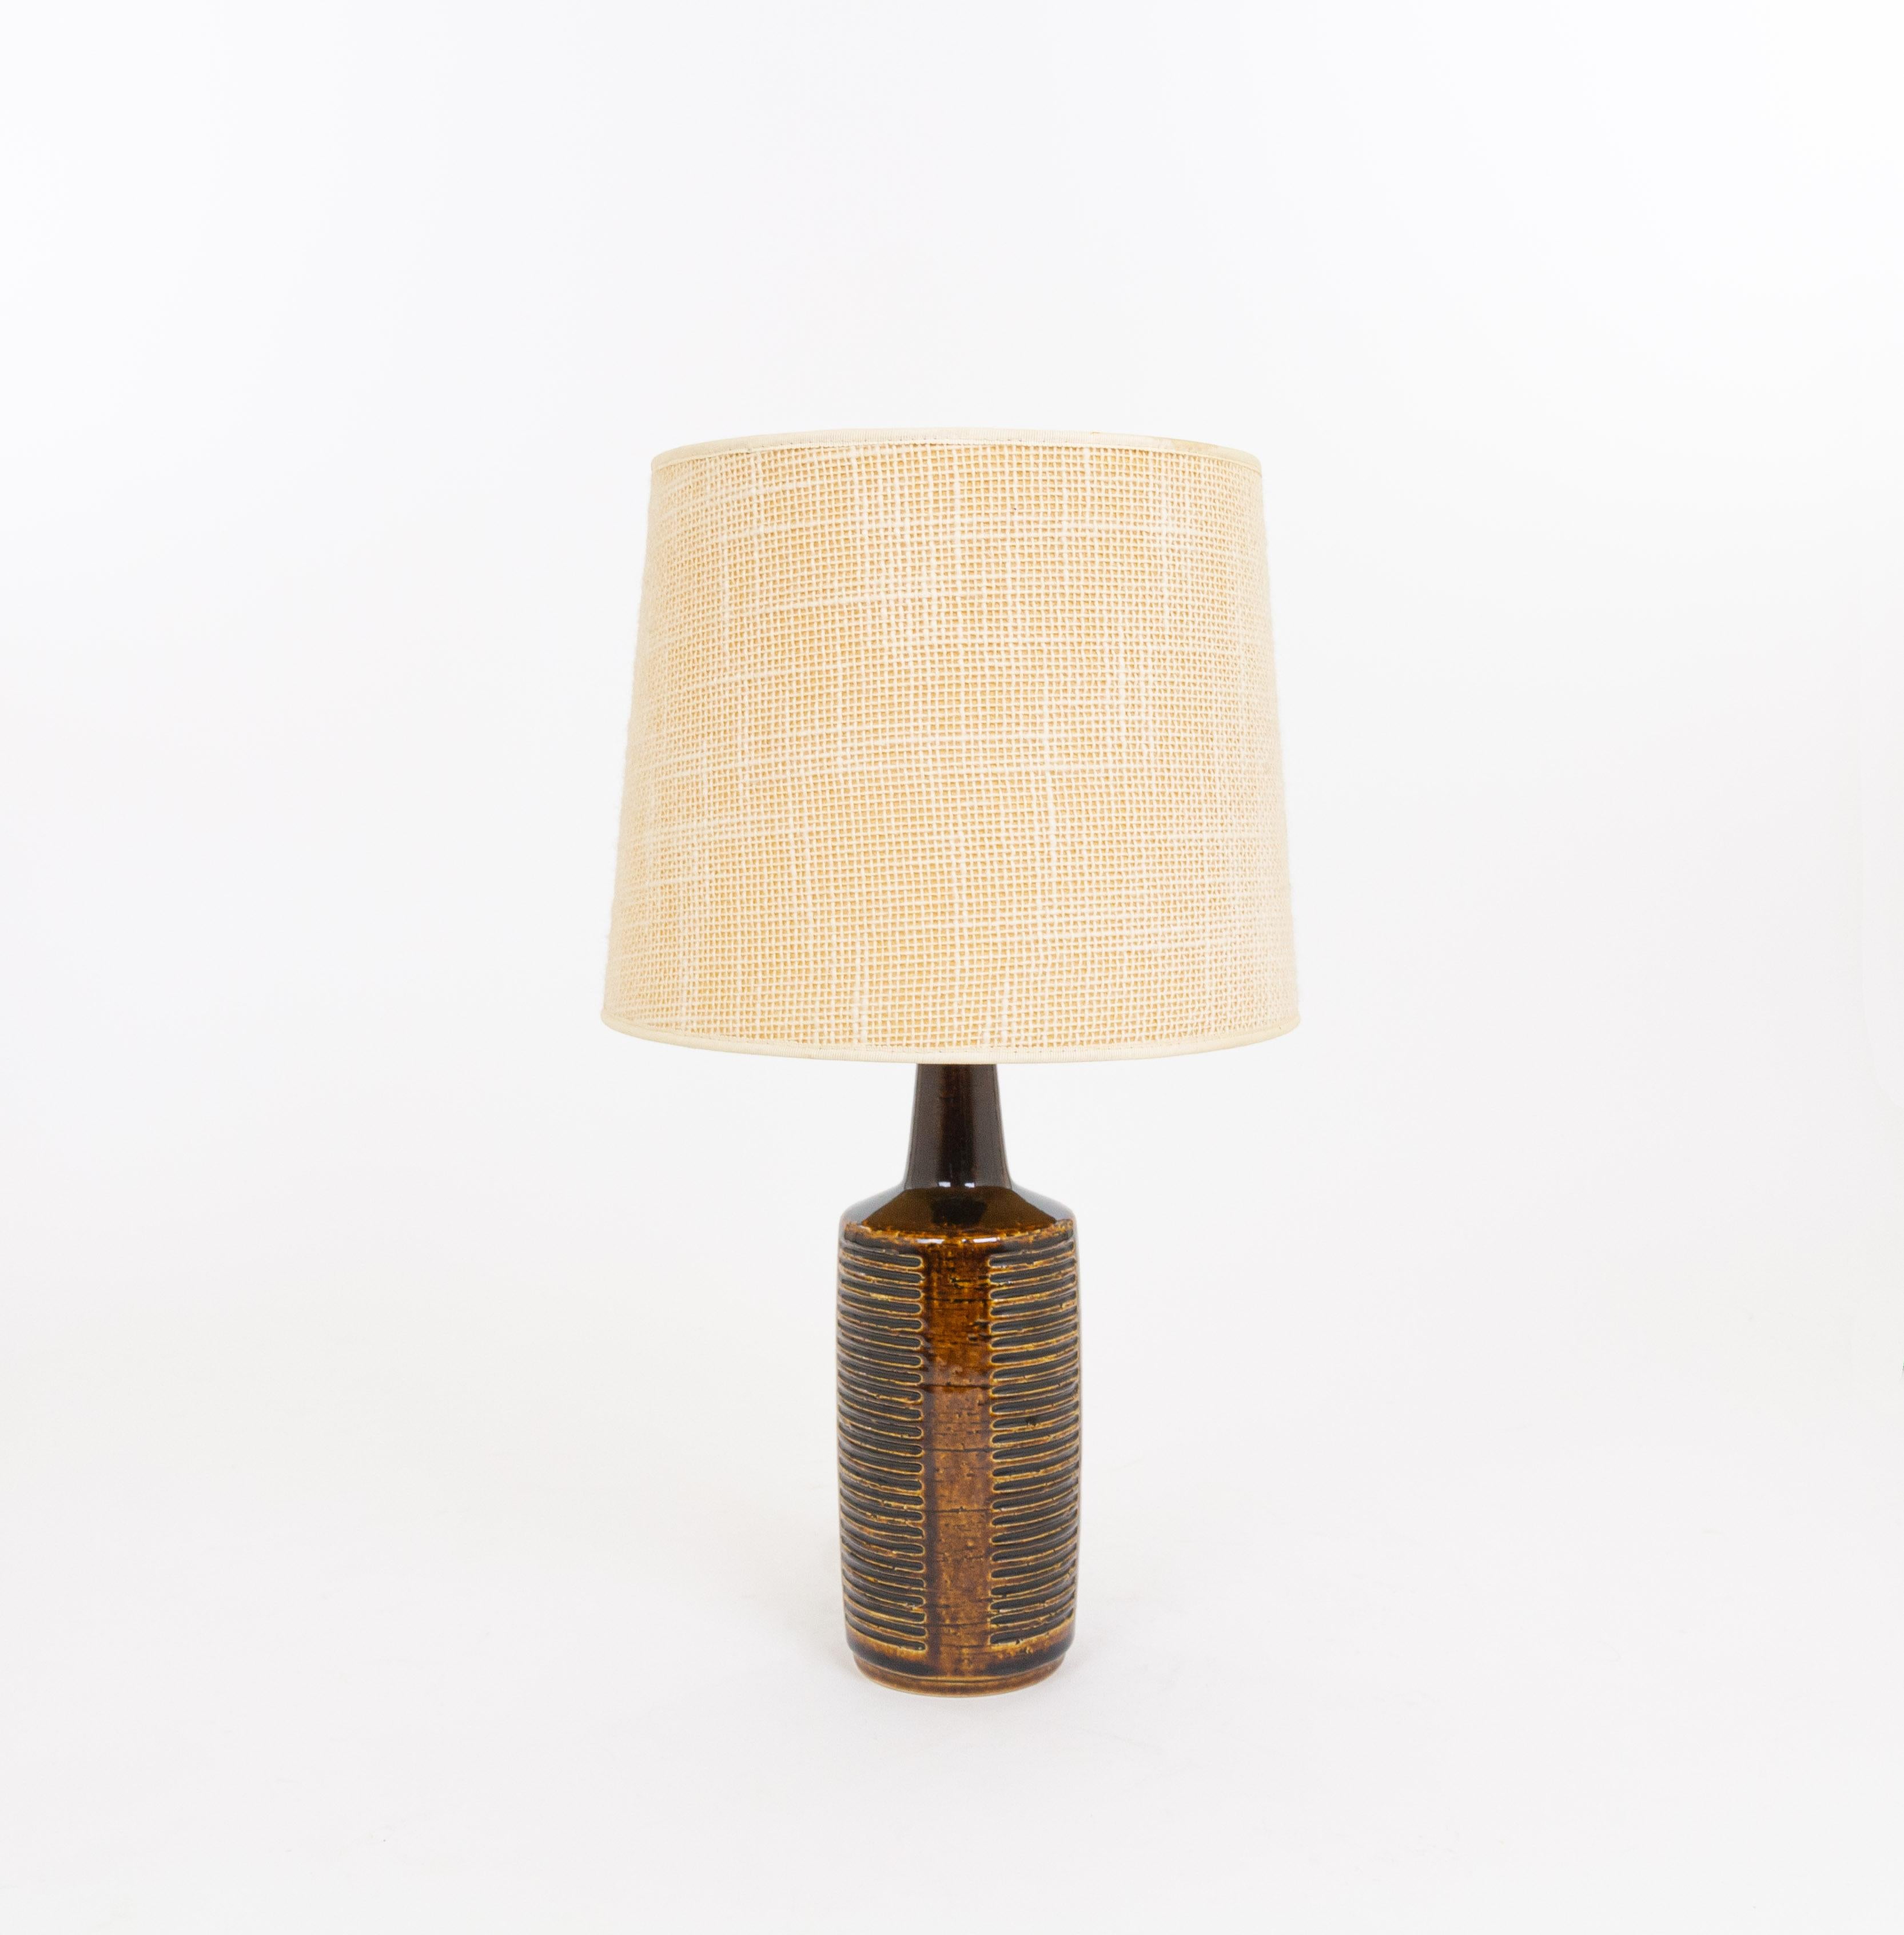 Model DL/30 table lamp made by Annelise and Per Linnemann-Schmidt for Palshus in the 1960s. The colour of the handmade decorated base is Chestnut Brown. It has impressed, geometric patterns.

The lamp comes with its original lampshade holder. The